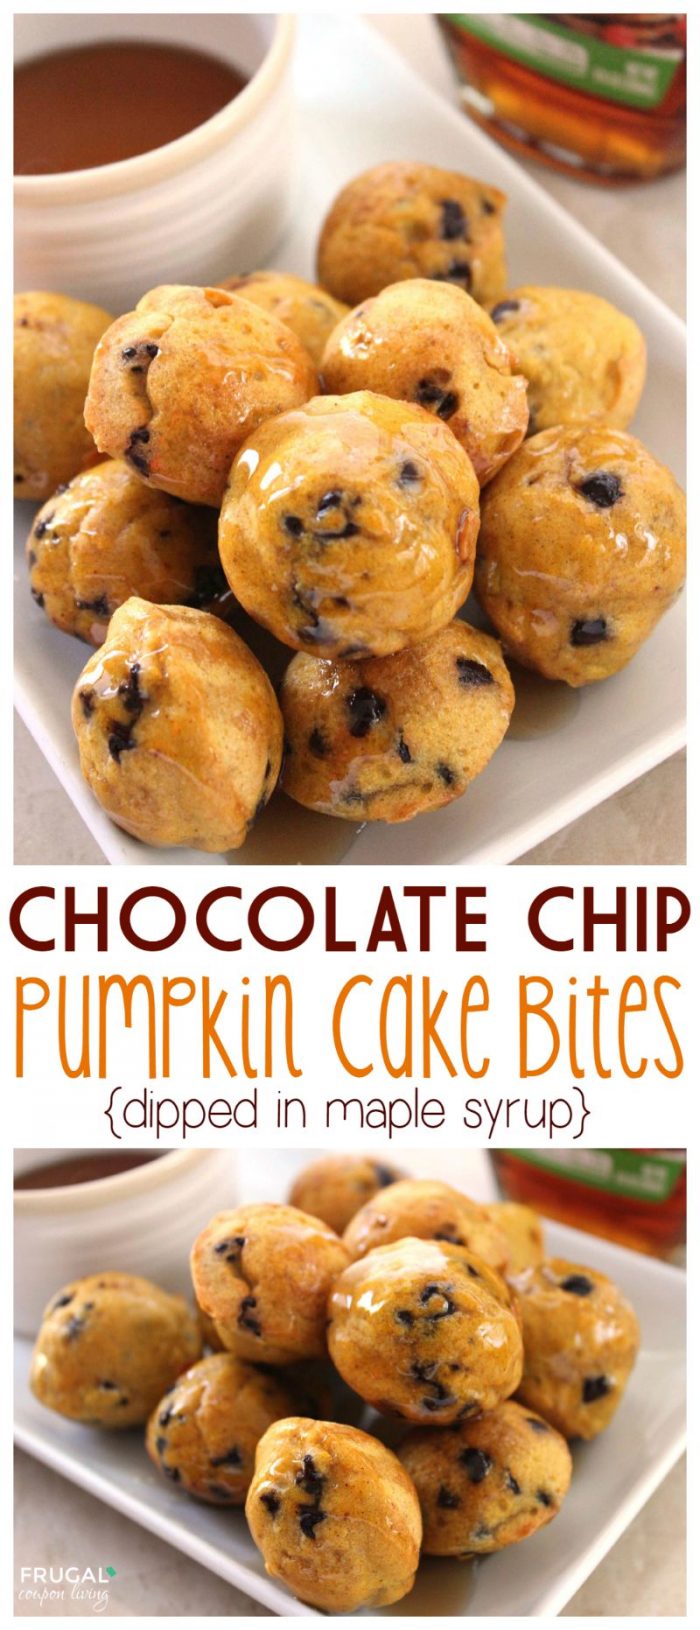 Chocolate Chip Pumpkin Bites on Frugal Coupon Living